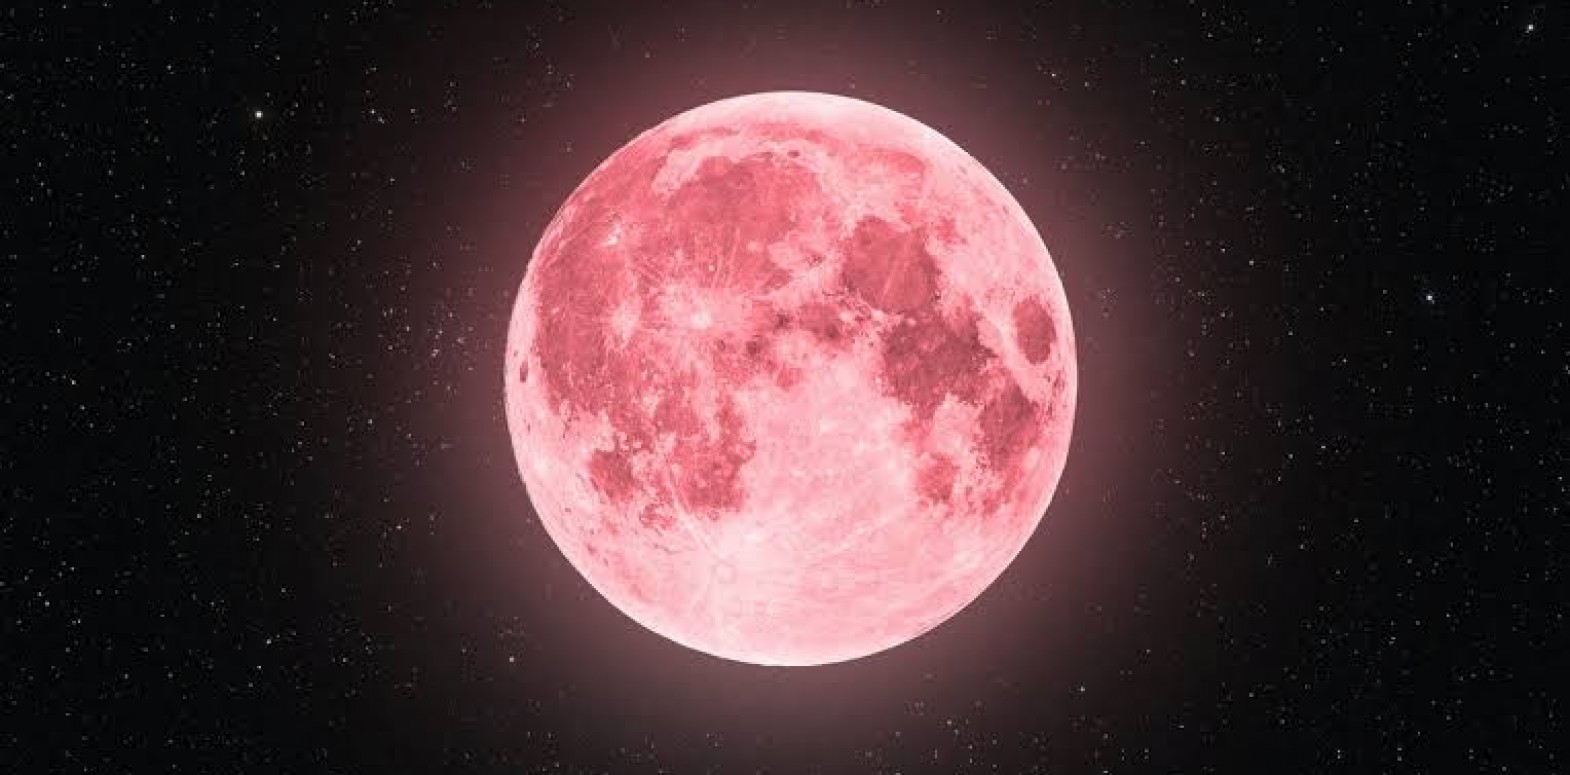 Will the moon appear pink over a few days?